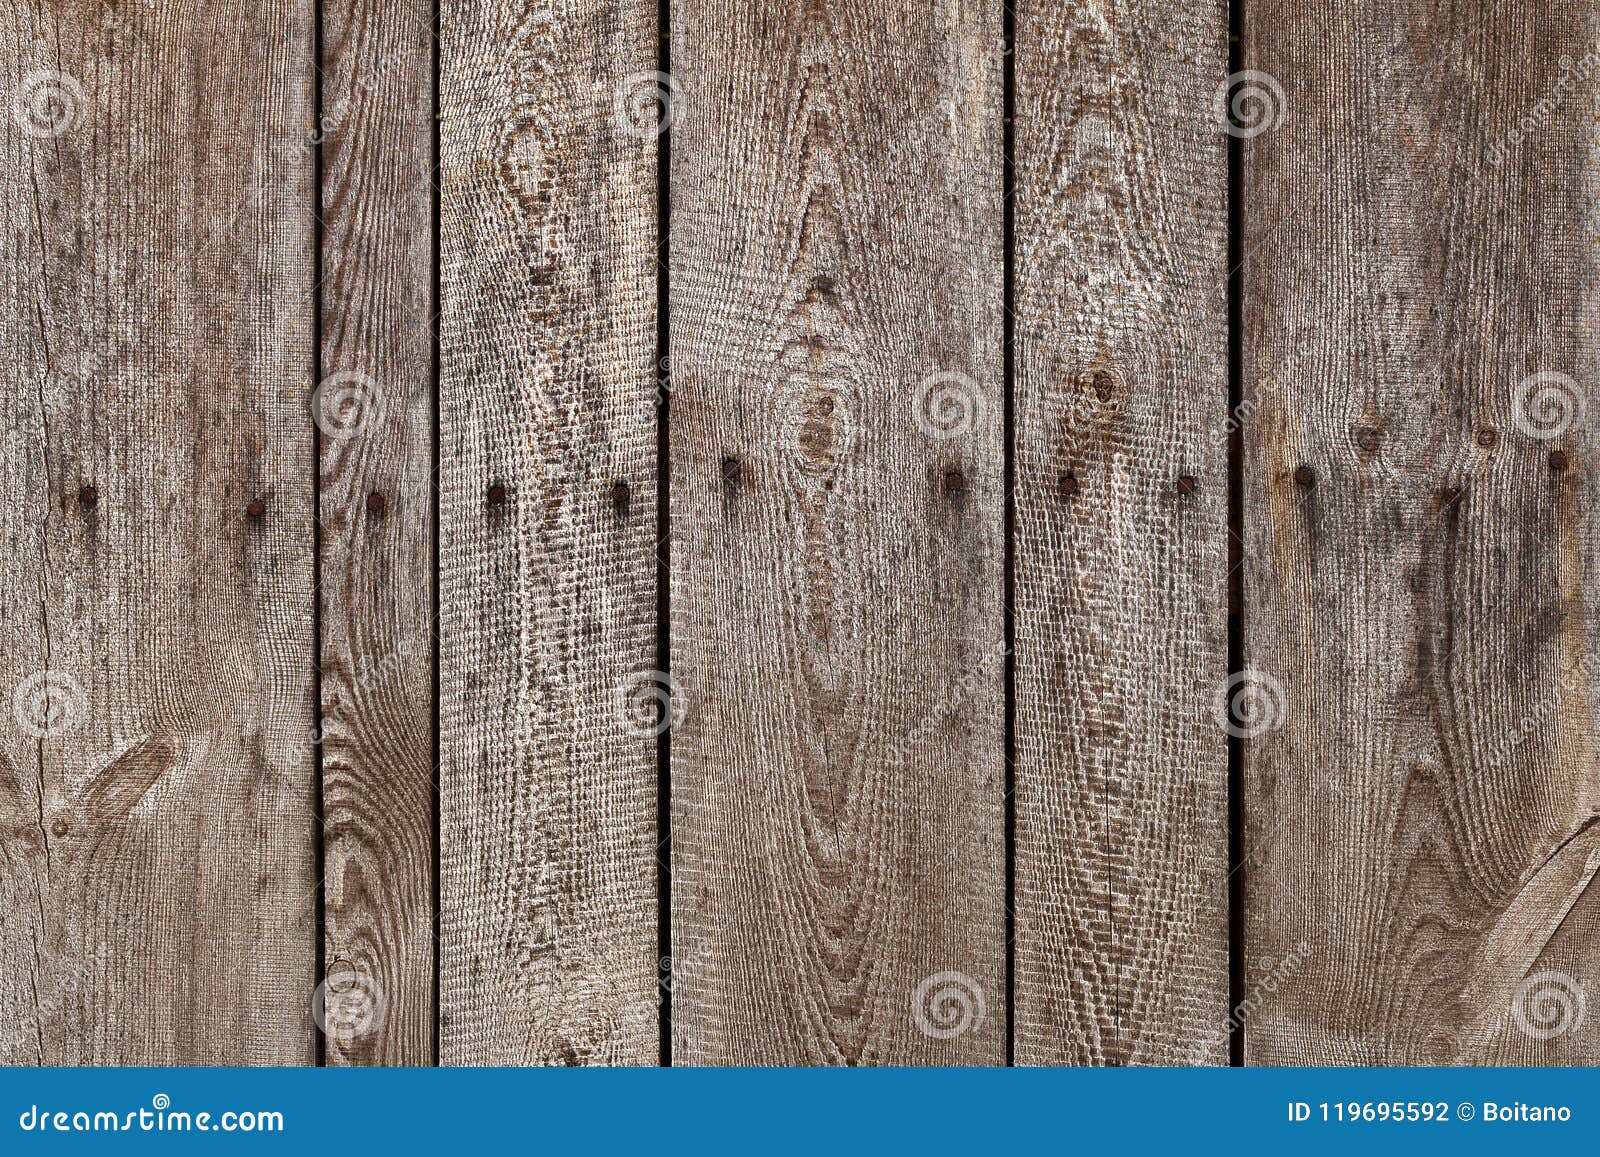 old wood plank with steel sinker nails texture background. the texture of old wood. vertical wooden planks.